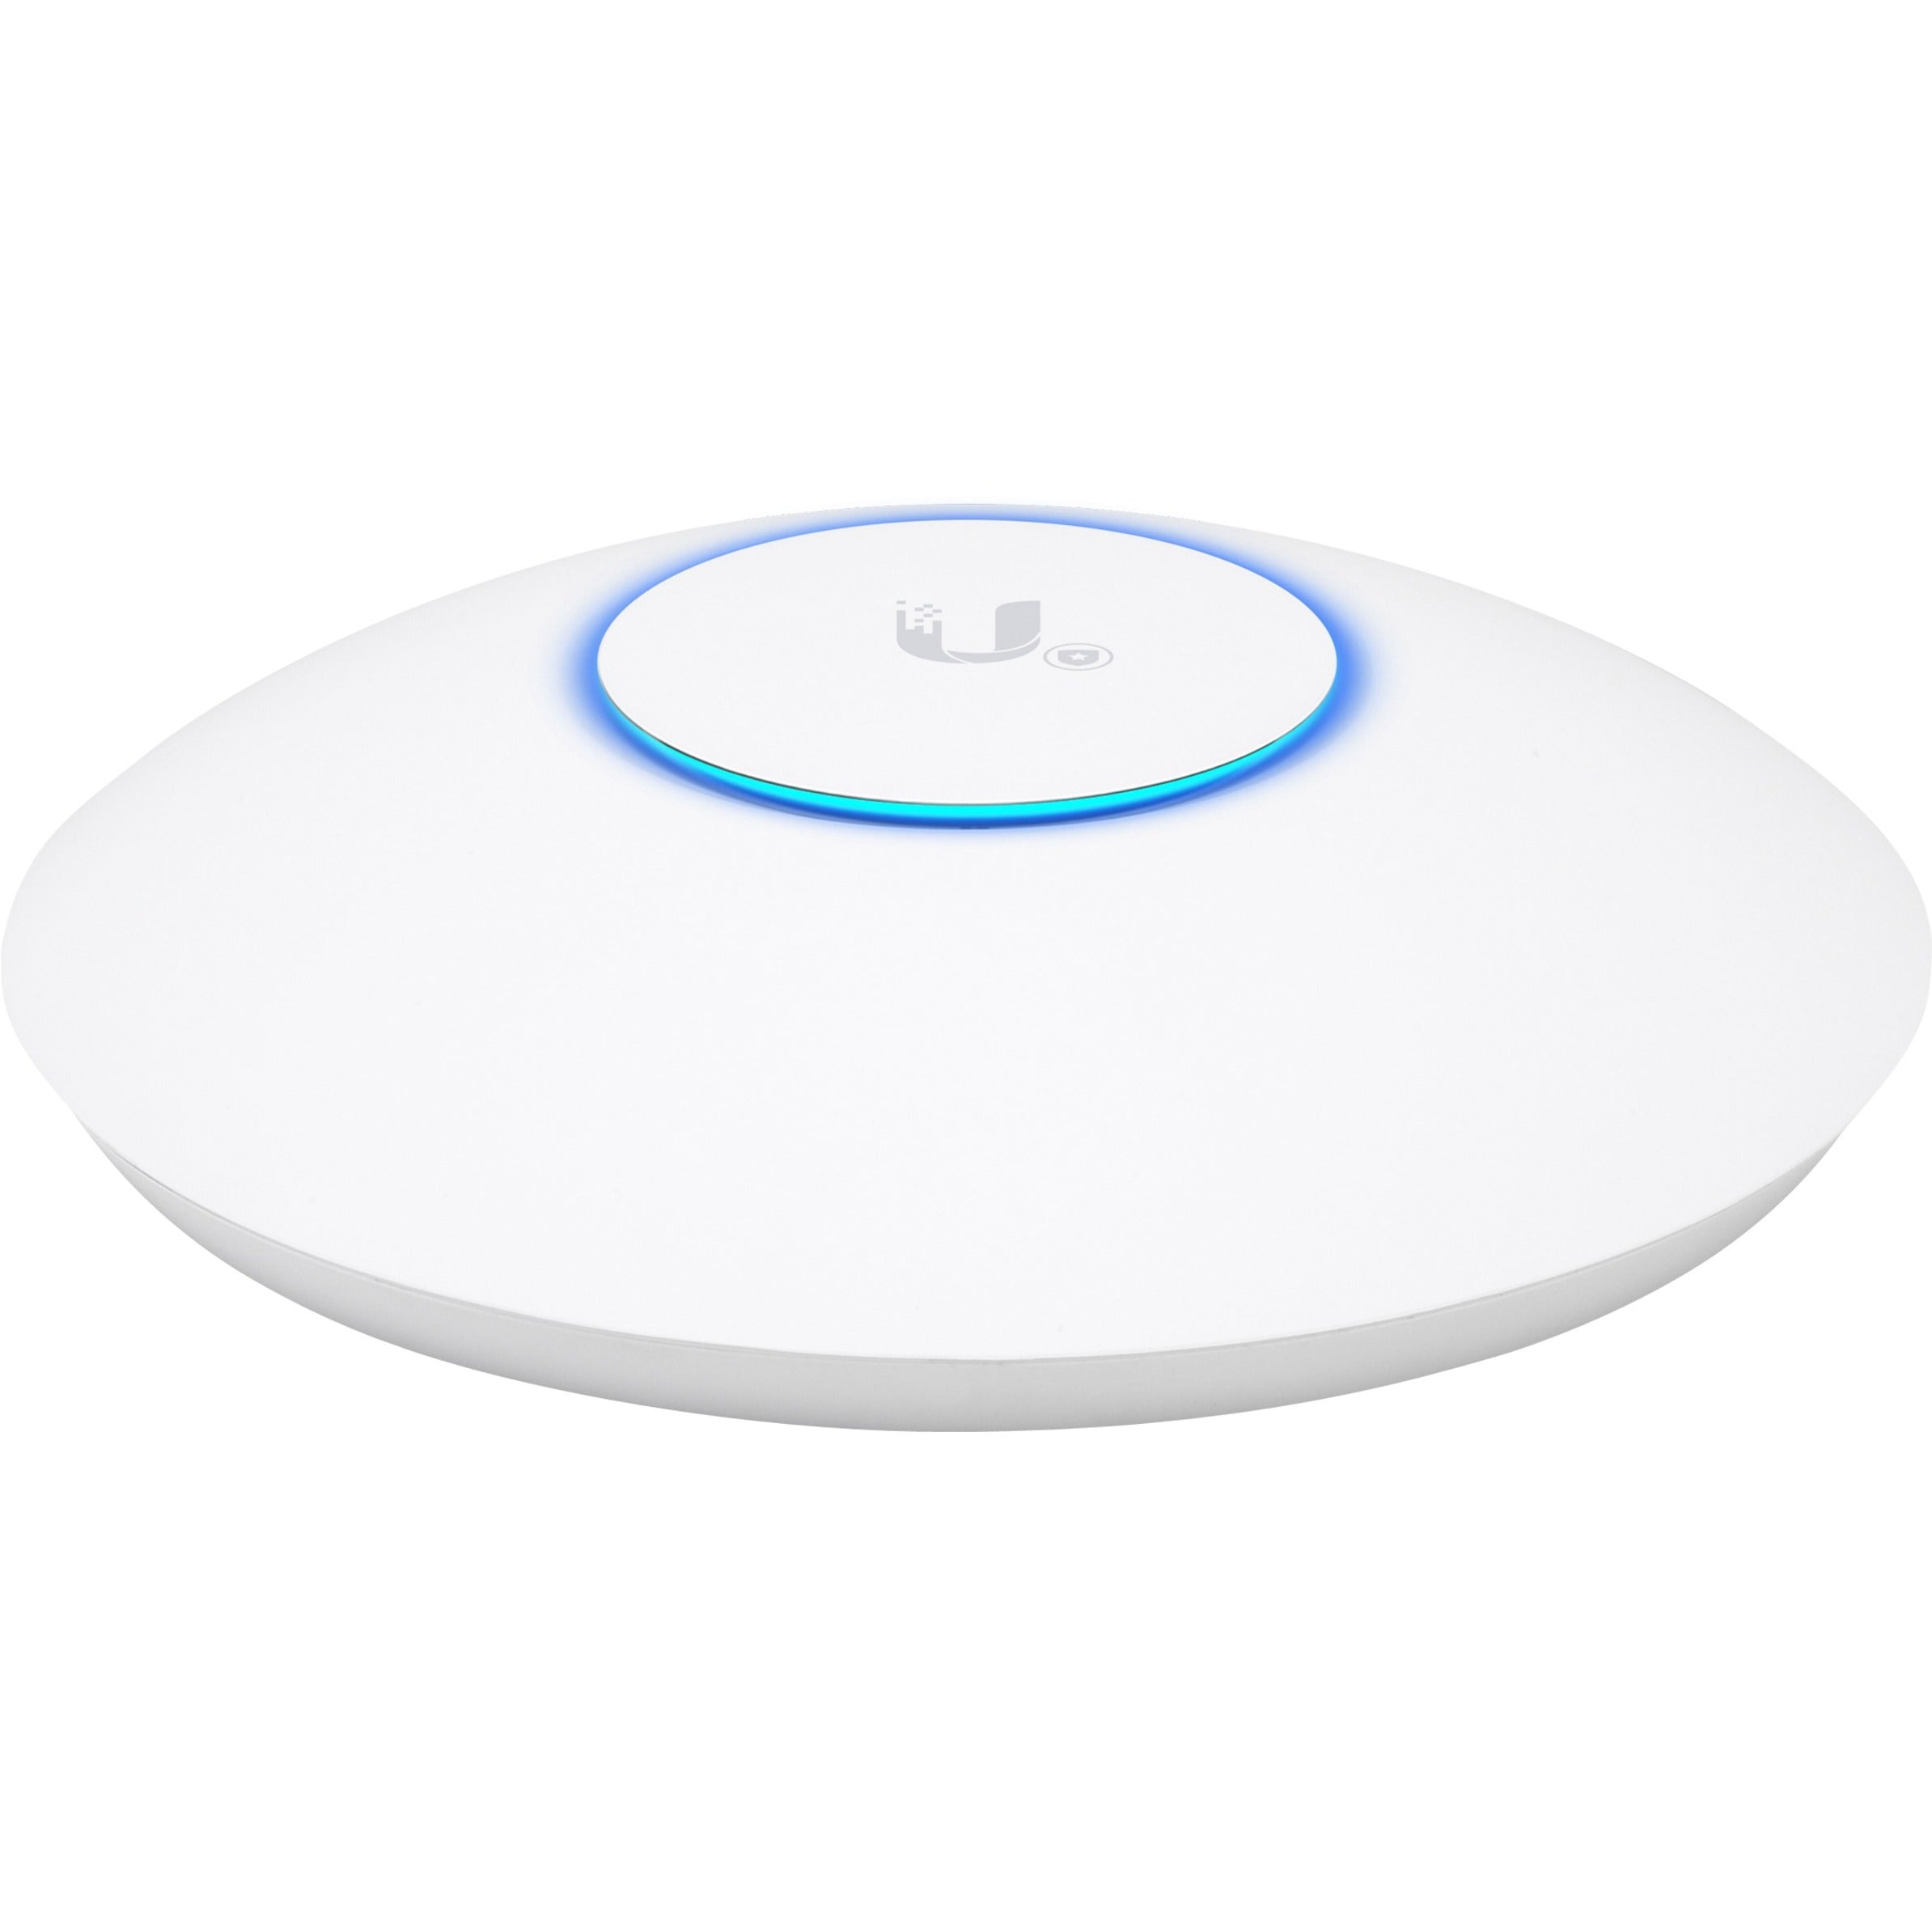 Ubiquiti UAP-AC-SHD-5-US UniFi Wave2 AC AP Security & BLE, 802.11ac Wave 2 Access Point with Dedicated Security Radio